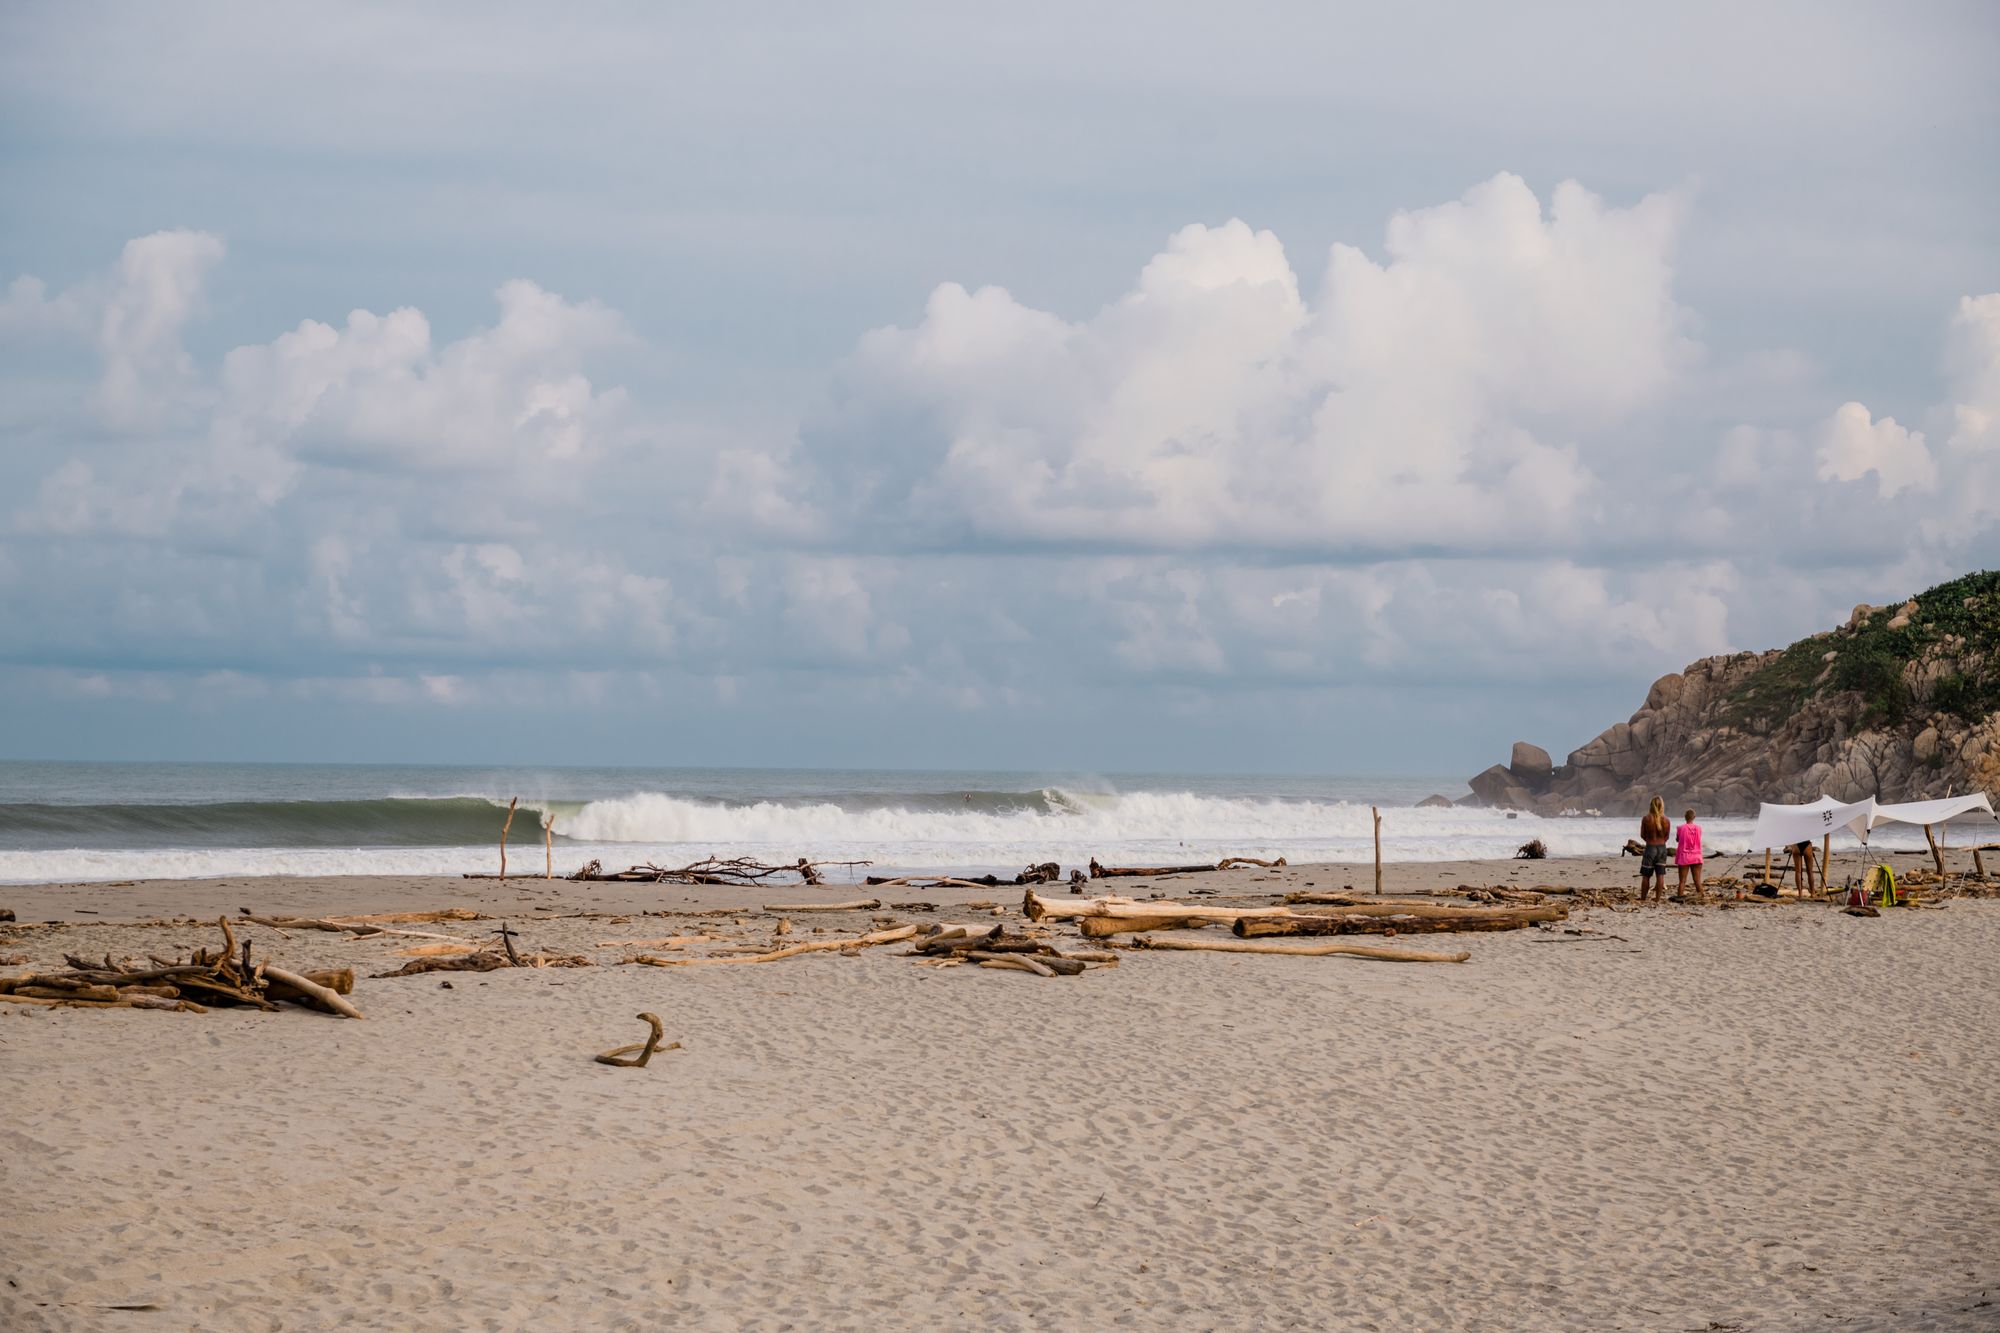 The Surf Trip of a Lifetime in Oaxaca, Mexico